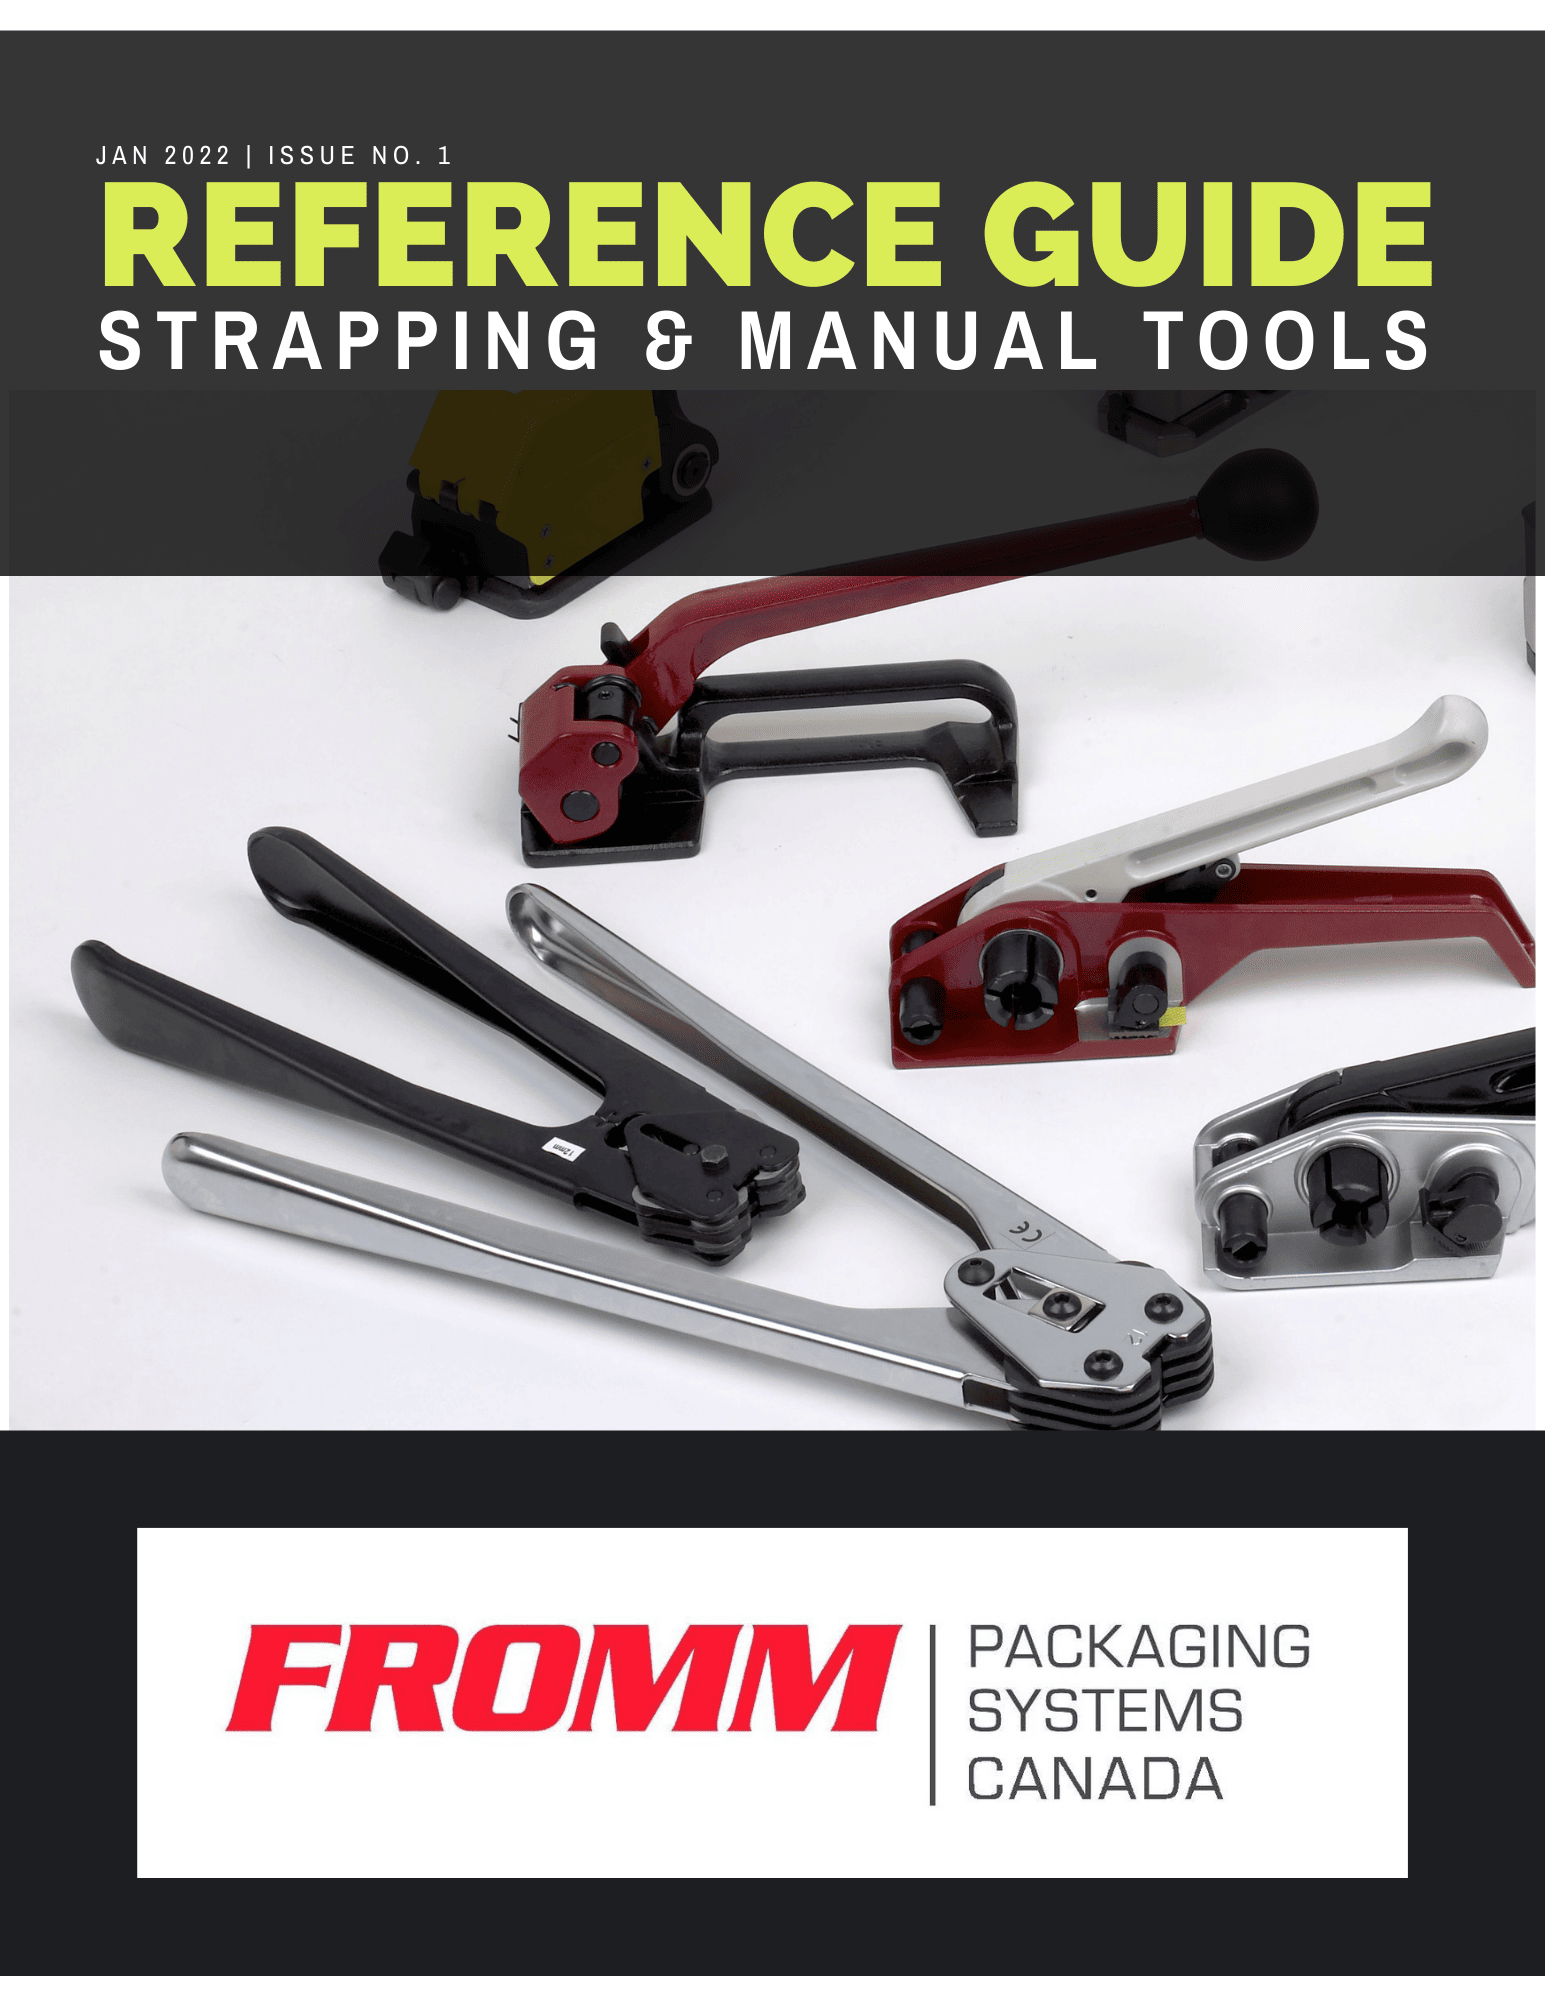 Reference Guide for Strapping & Manual Tools